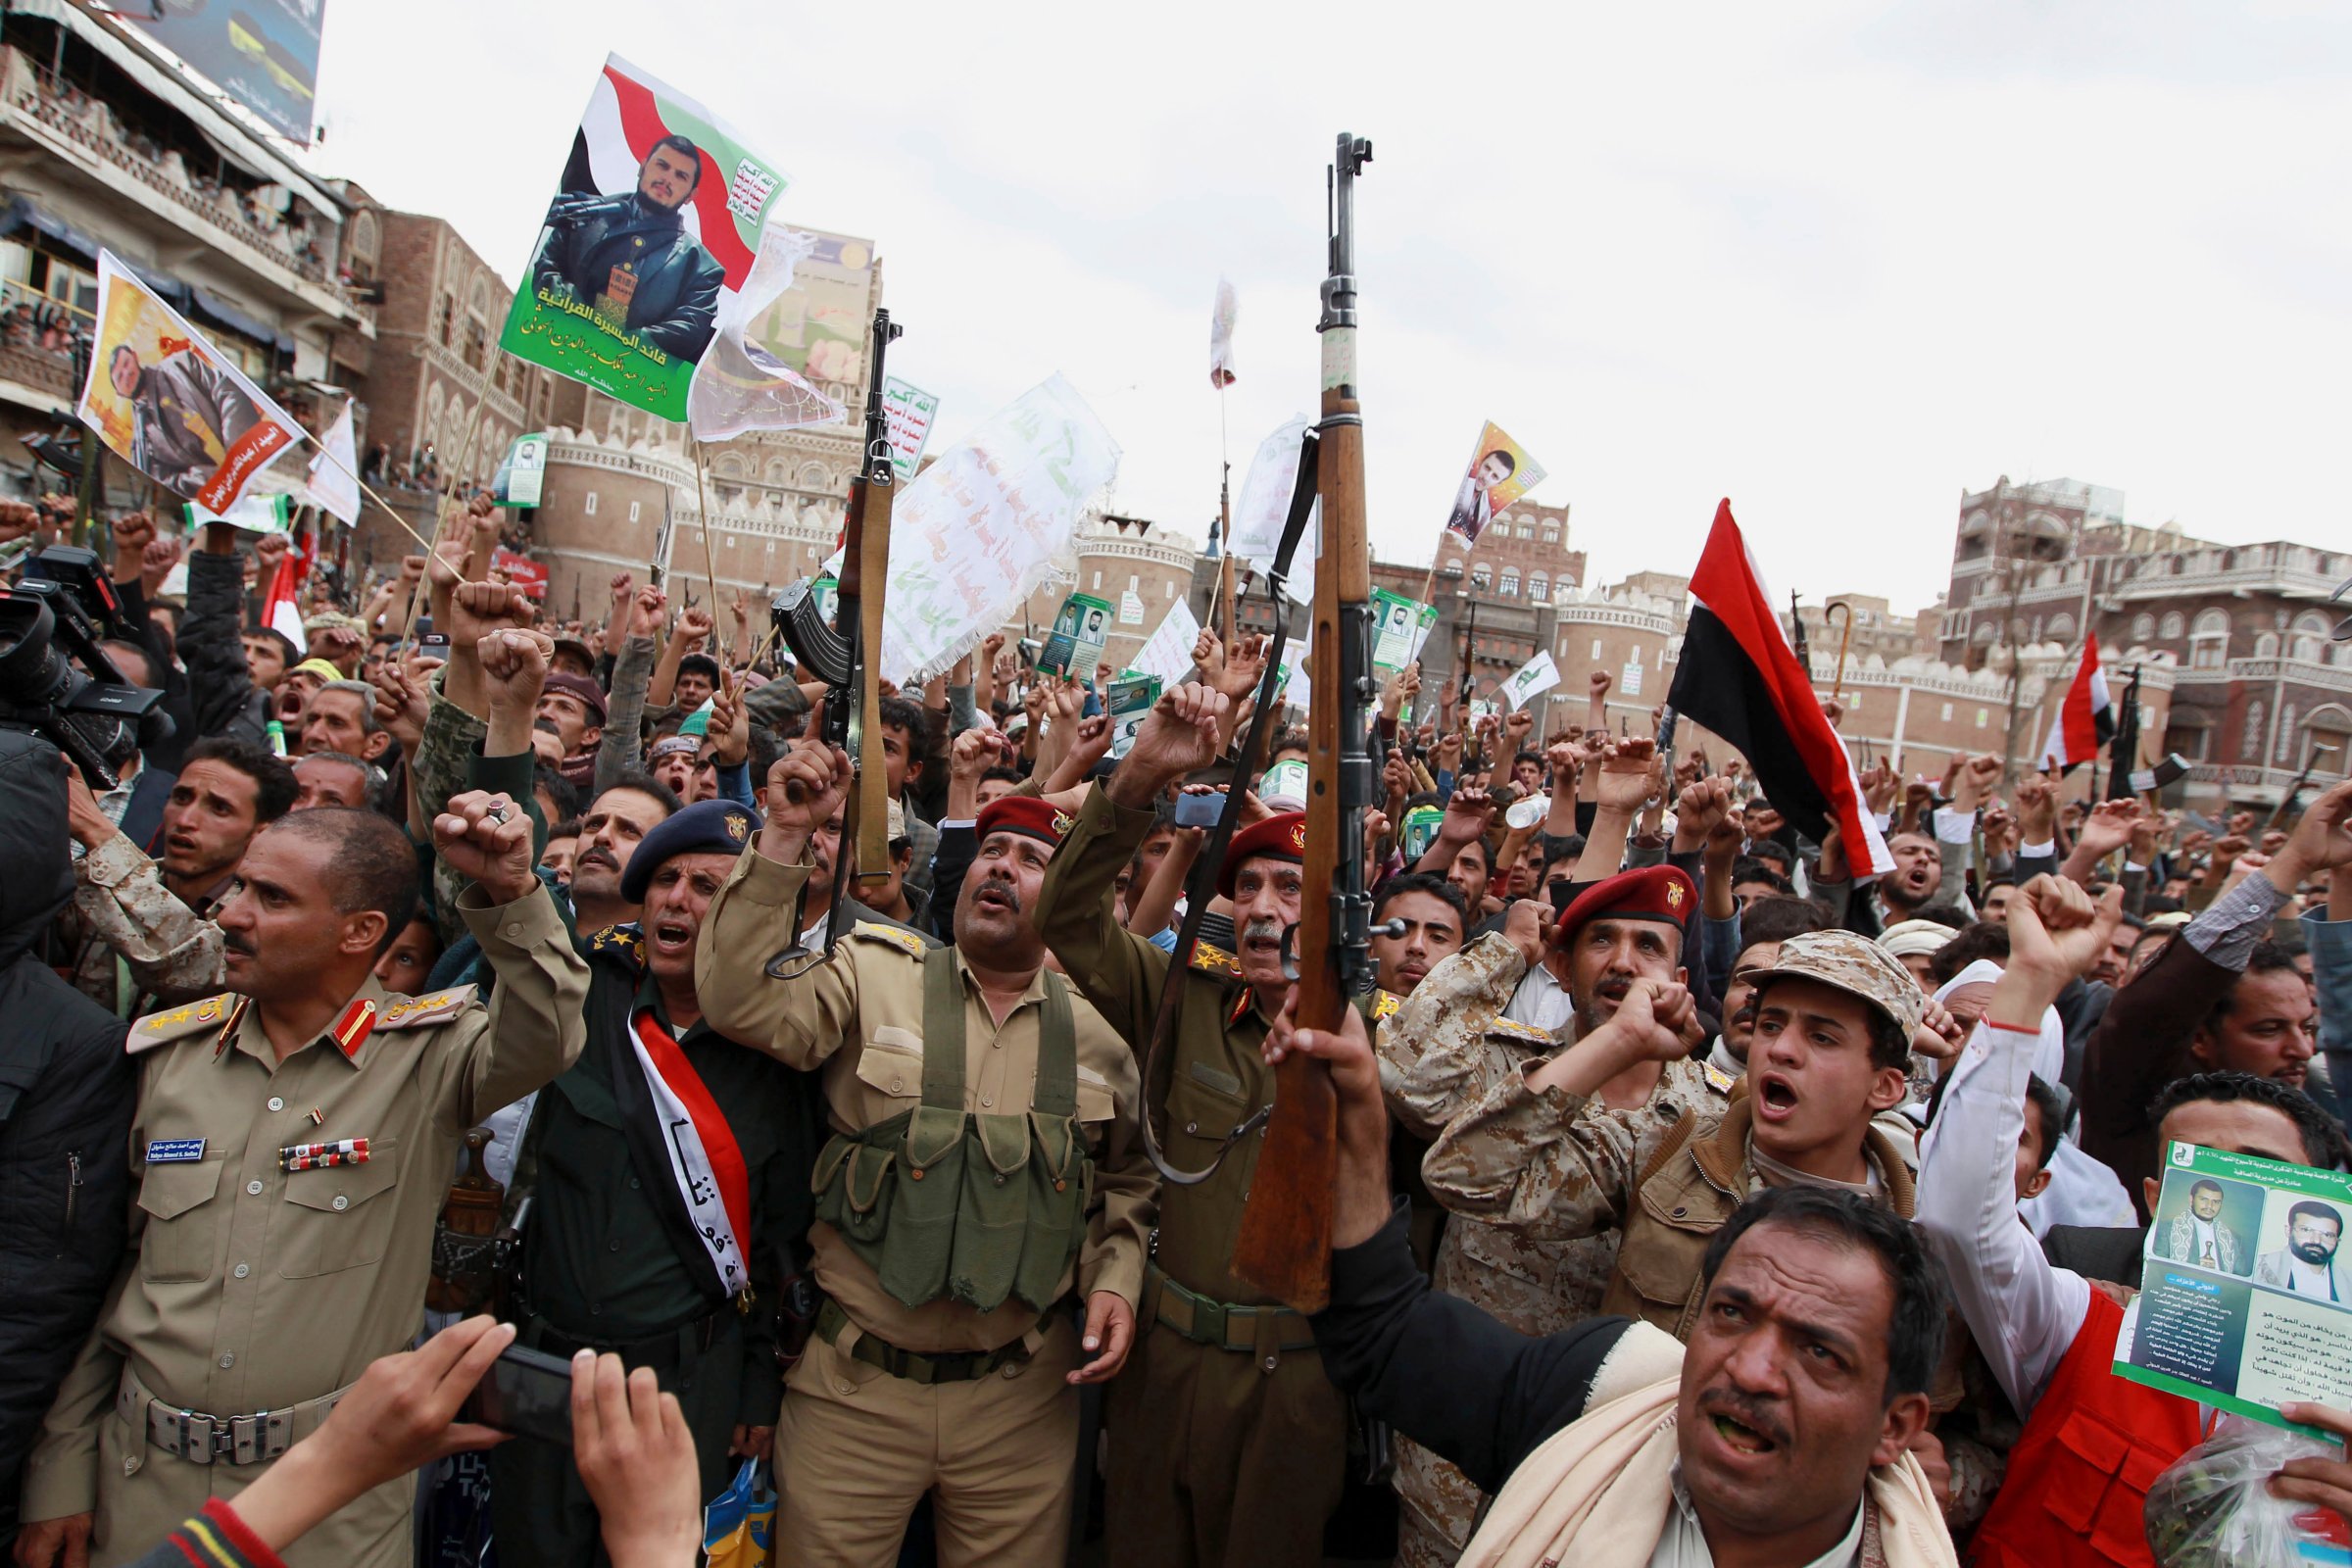 Shiite rebels, known as Houthis, gather to protest against Saudi-led airstrikes in Sanaa, Yemen, on March 26, 2015.